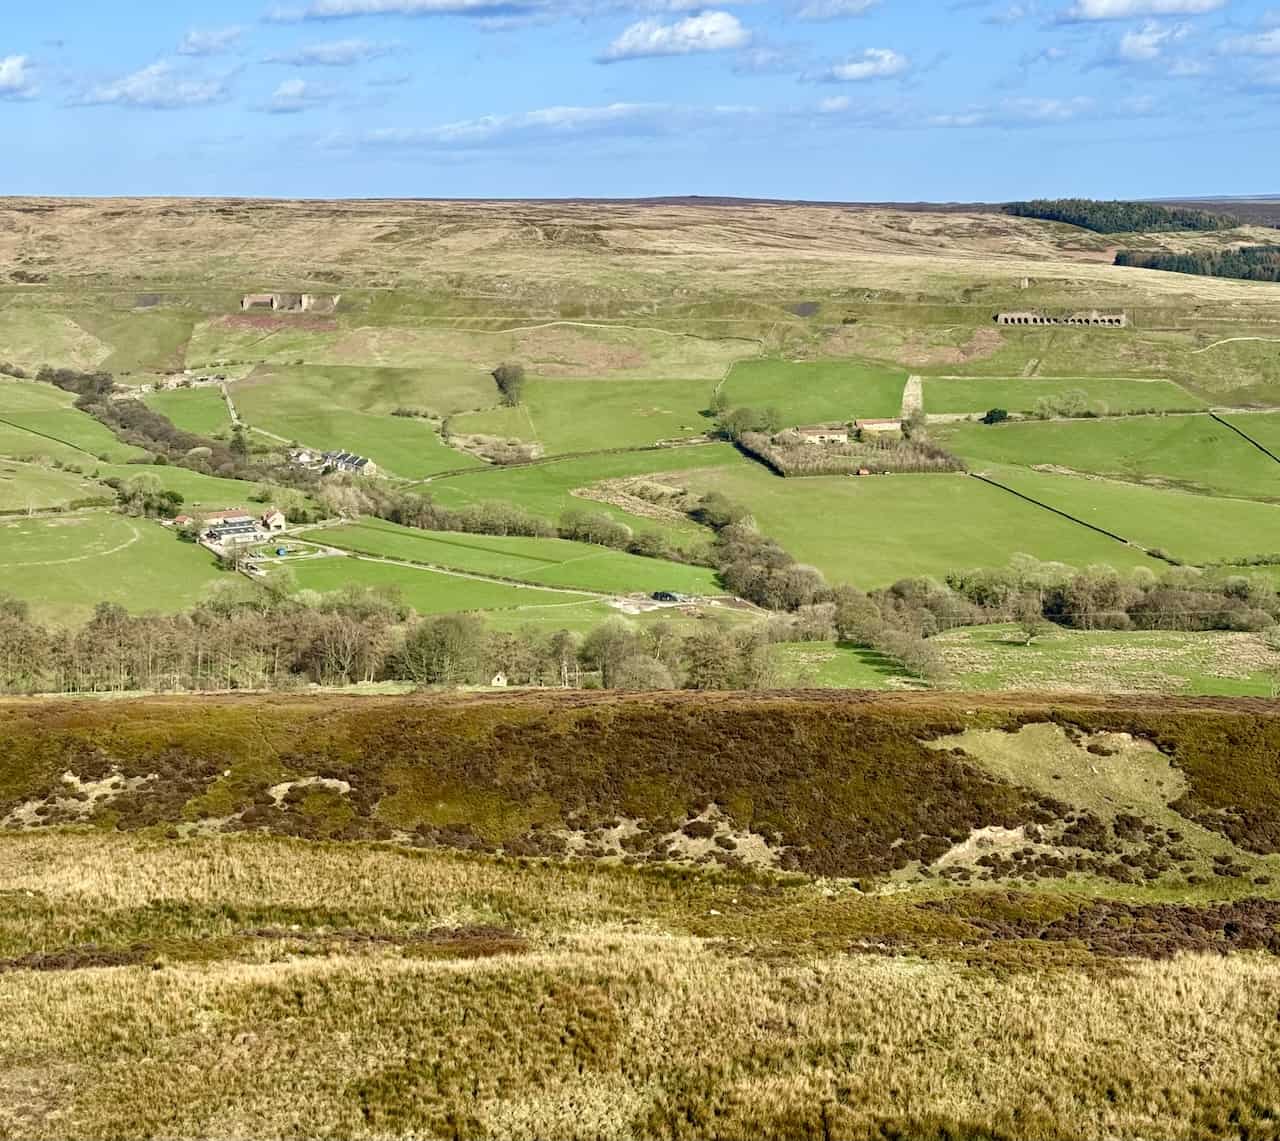 The eastward view across the valley floor towards the section of the old railway line showcases the Iron Kilns (to the left) and the Stone Kilns (to the right) in the photograph’s upper third, illustrating the industrial heritage of the area.